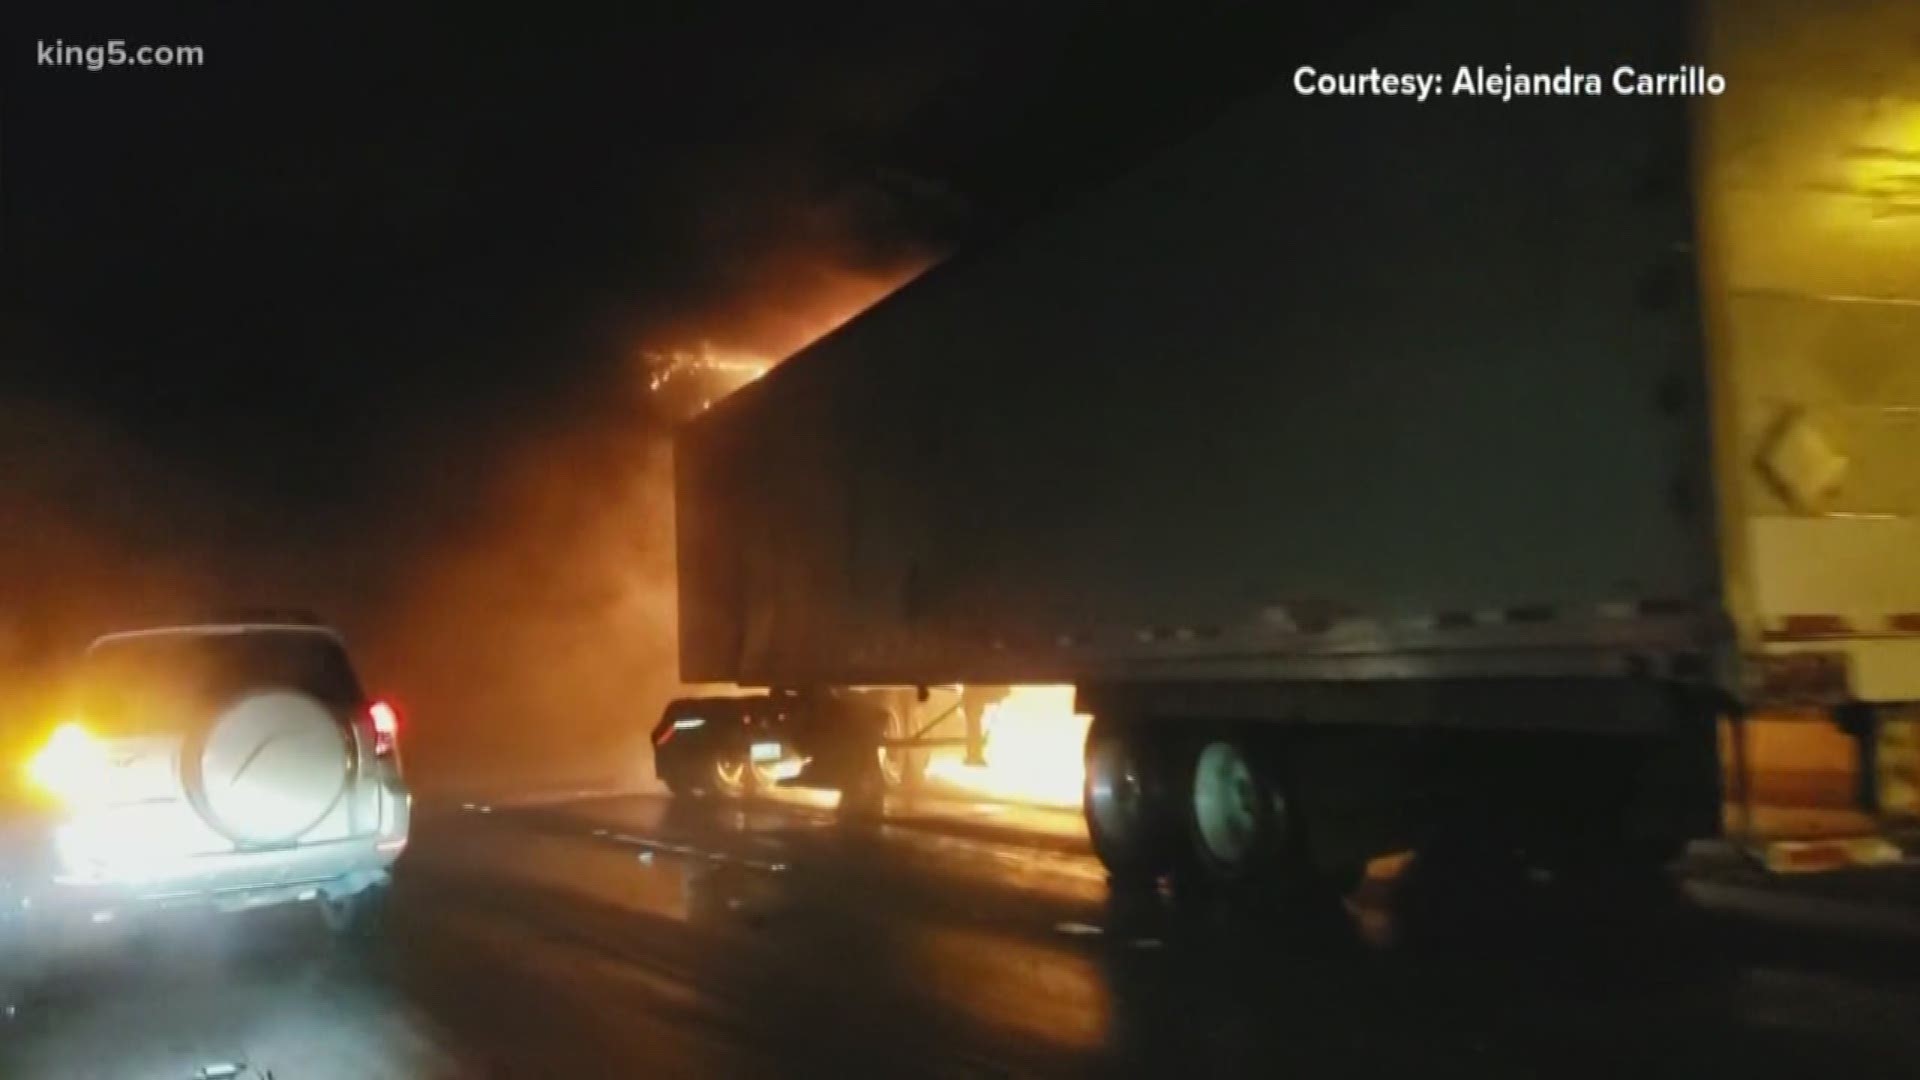 The driver of a semi-truck was cited for negligent driving after the rig crashed and caught fire on the southbound I-5 express lanes in Seattle early Friday morning.